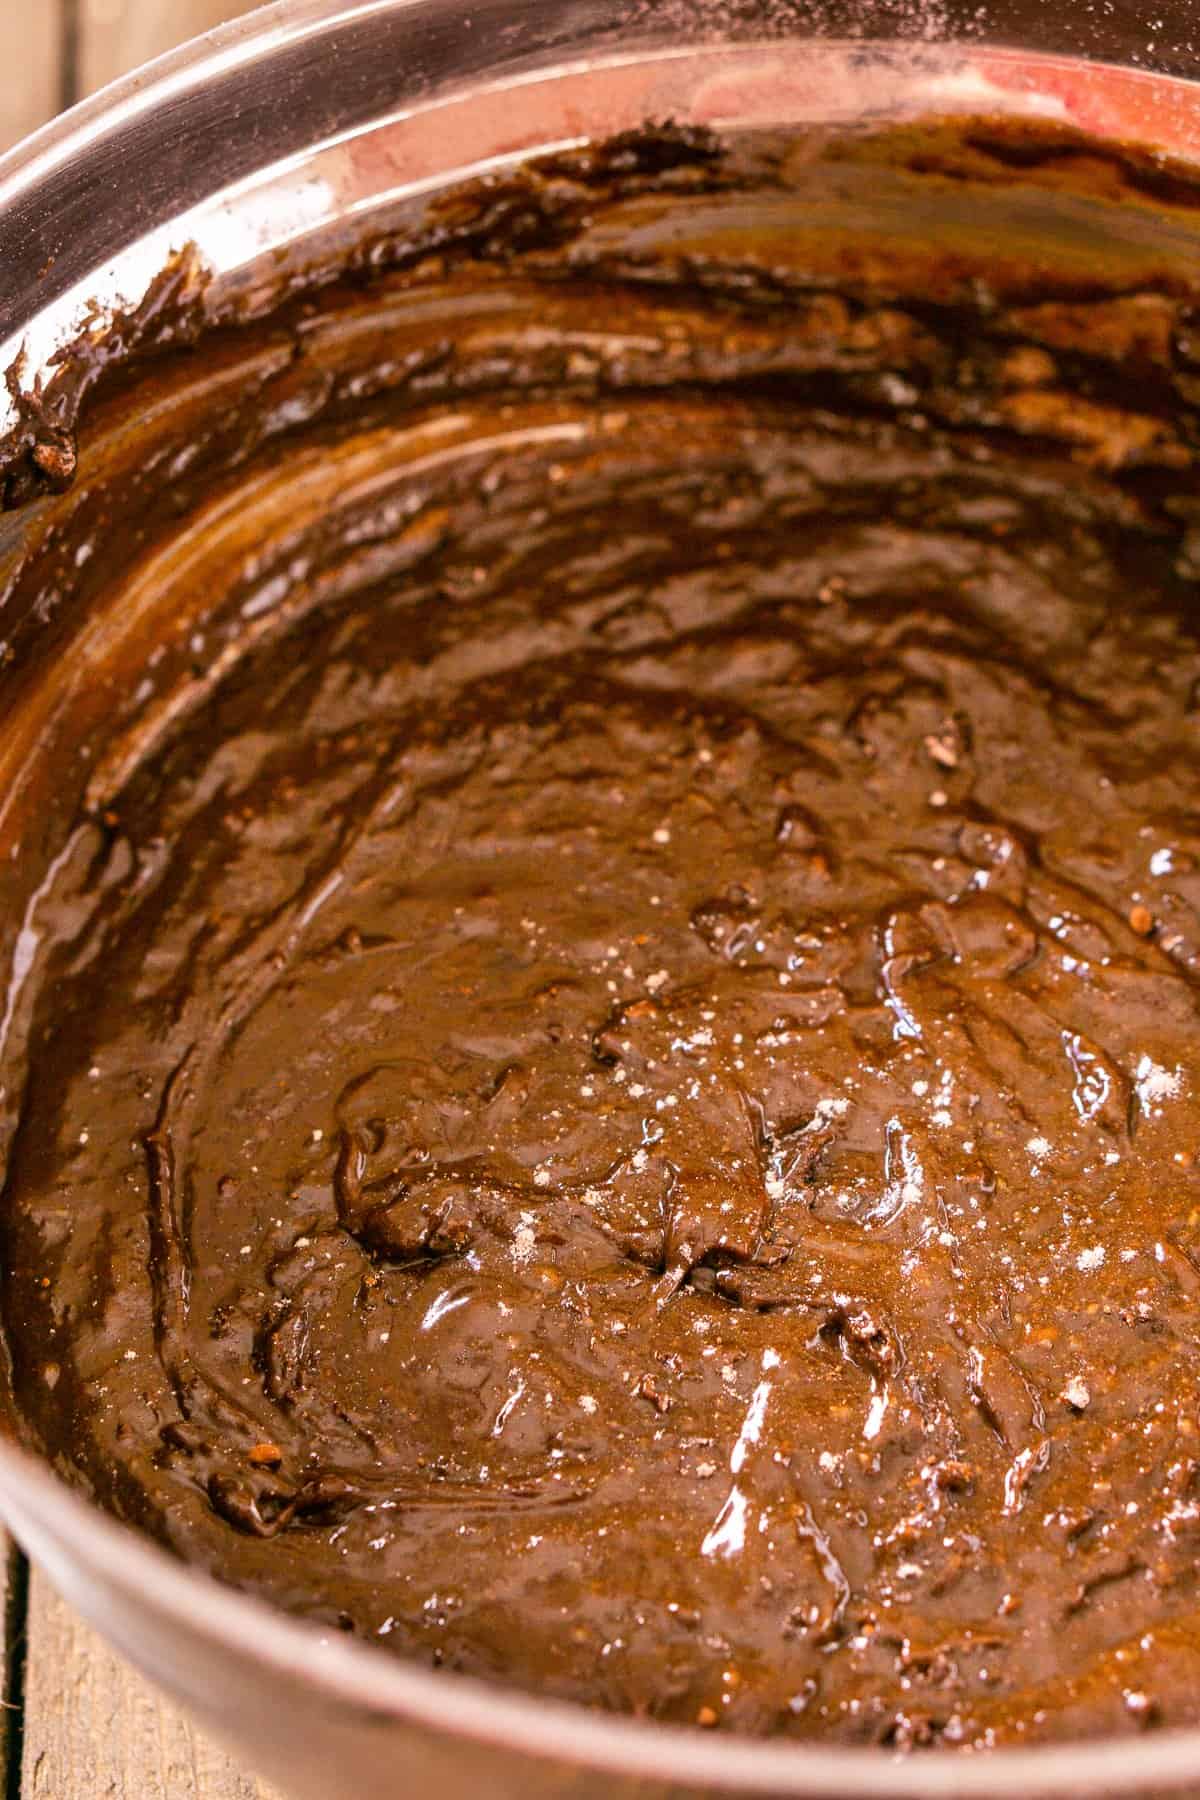 A bowl of fudgy stout brownie batter with just a few flour flakes on top.